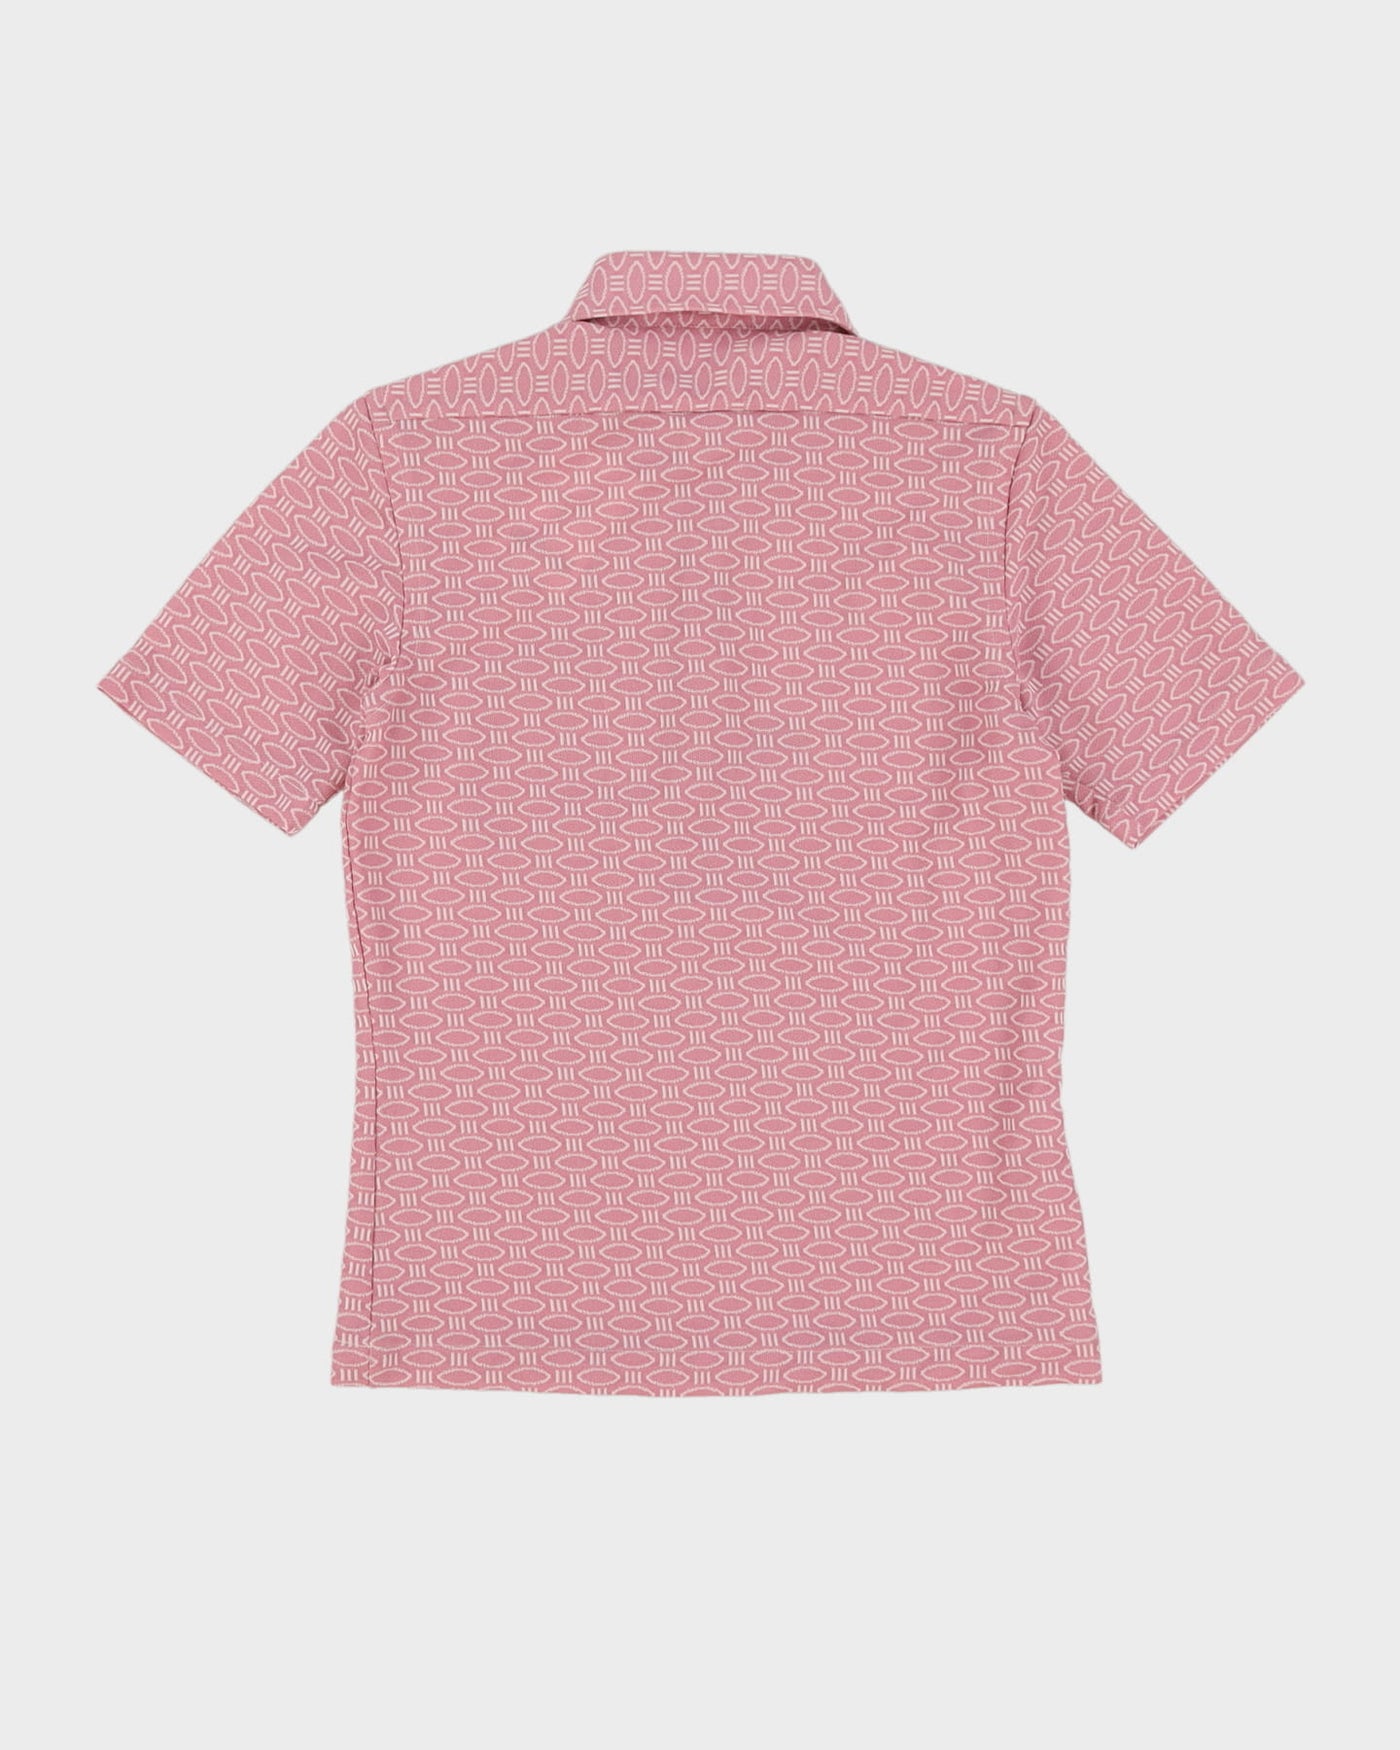 Vintage 80s Swan Pink All Over Patterned Polo Shirt - S